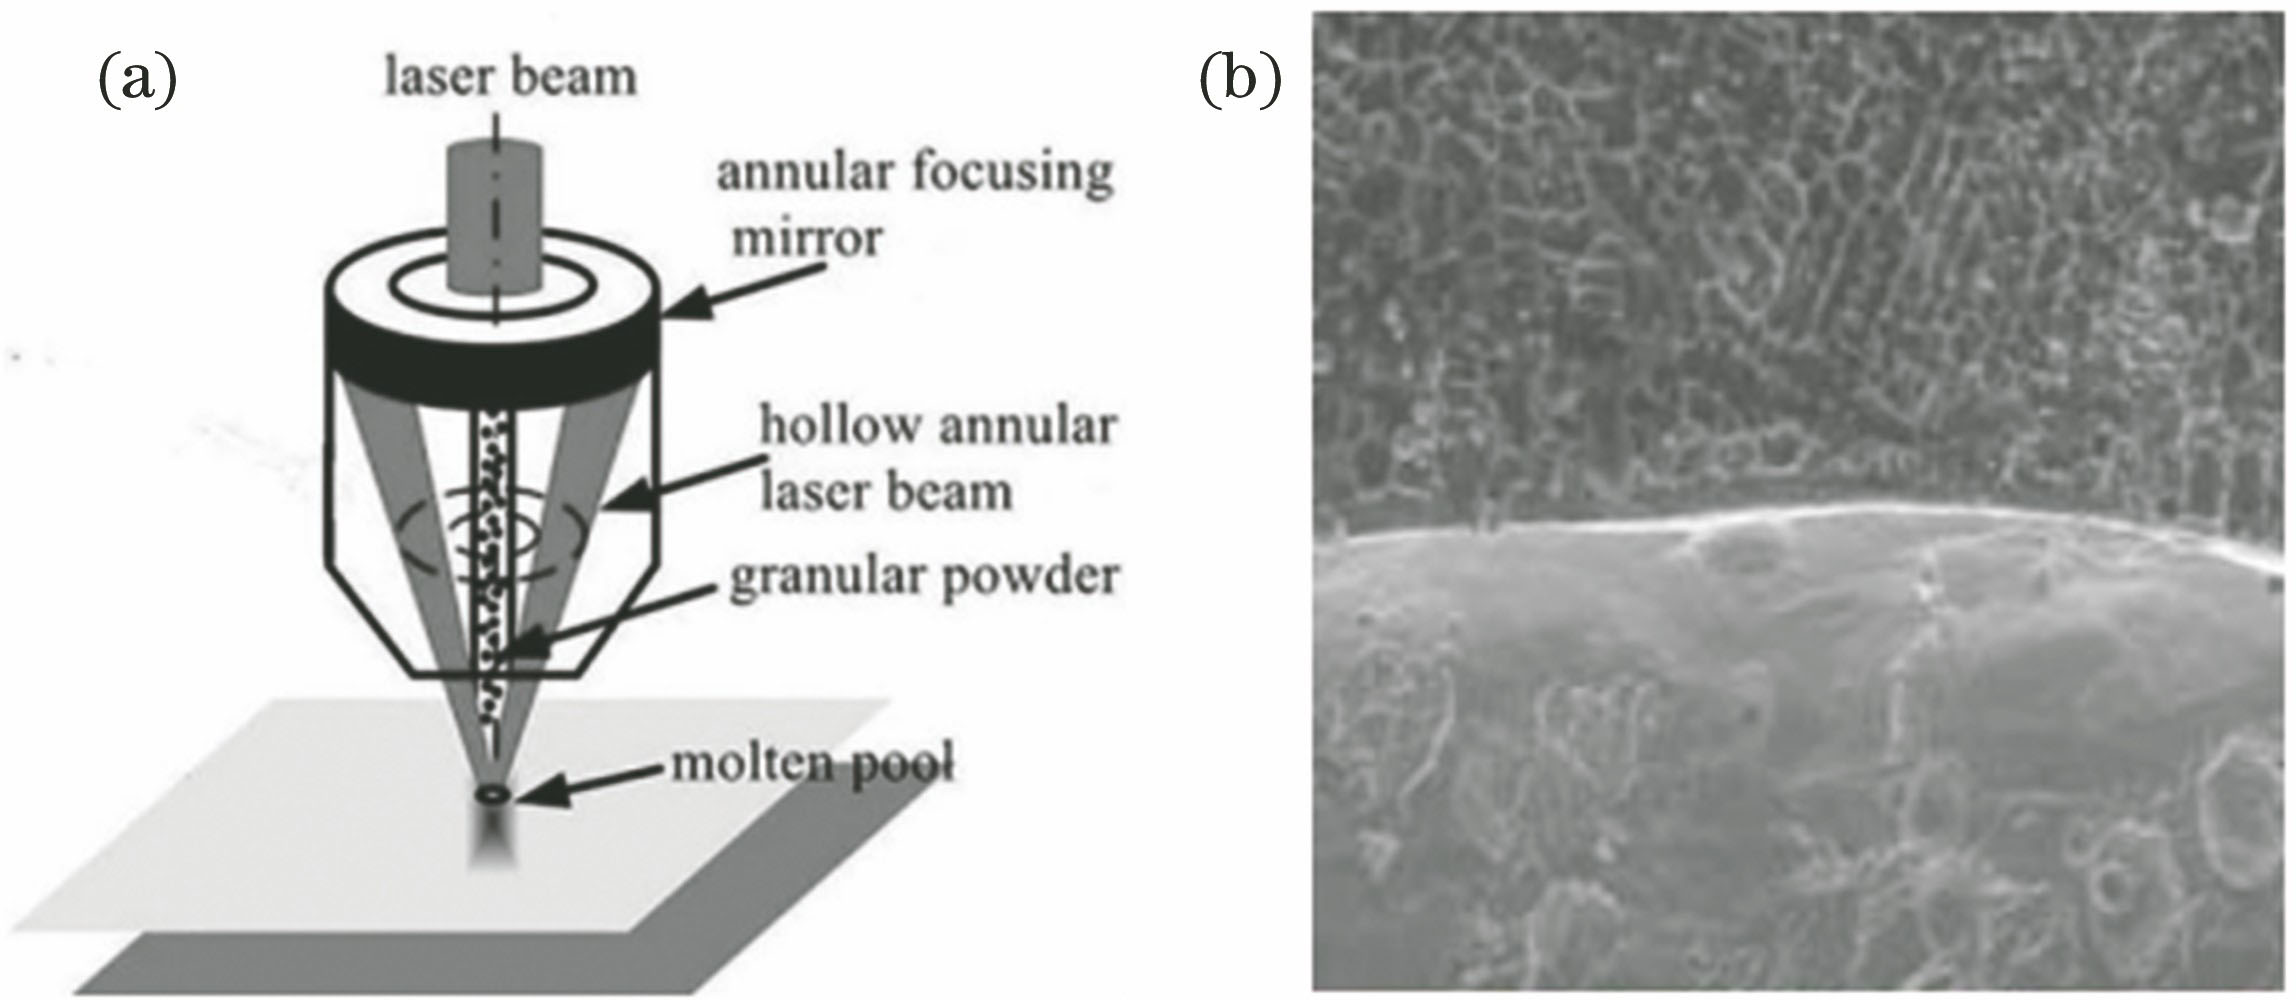 Coaxial inside-beam powder feeding[10-11]. (a) Schematic diagram; (b) interface of laser cladding layer and matrix